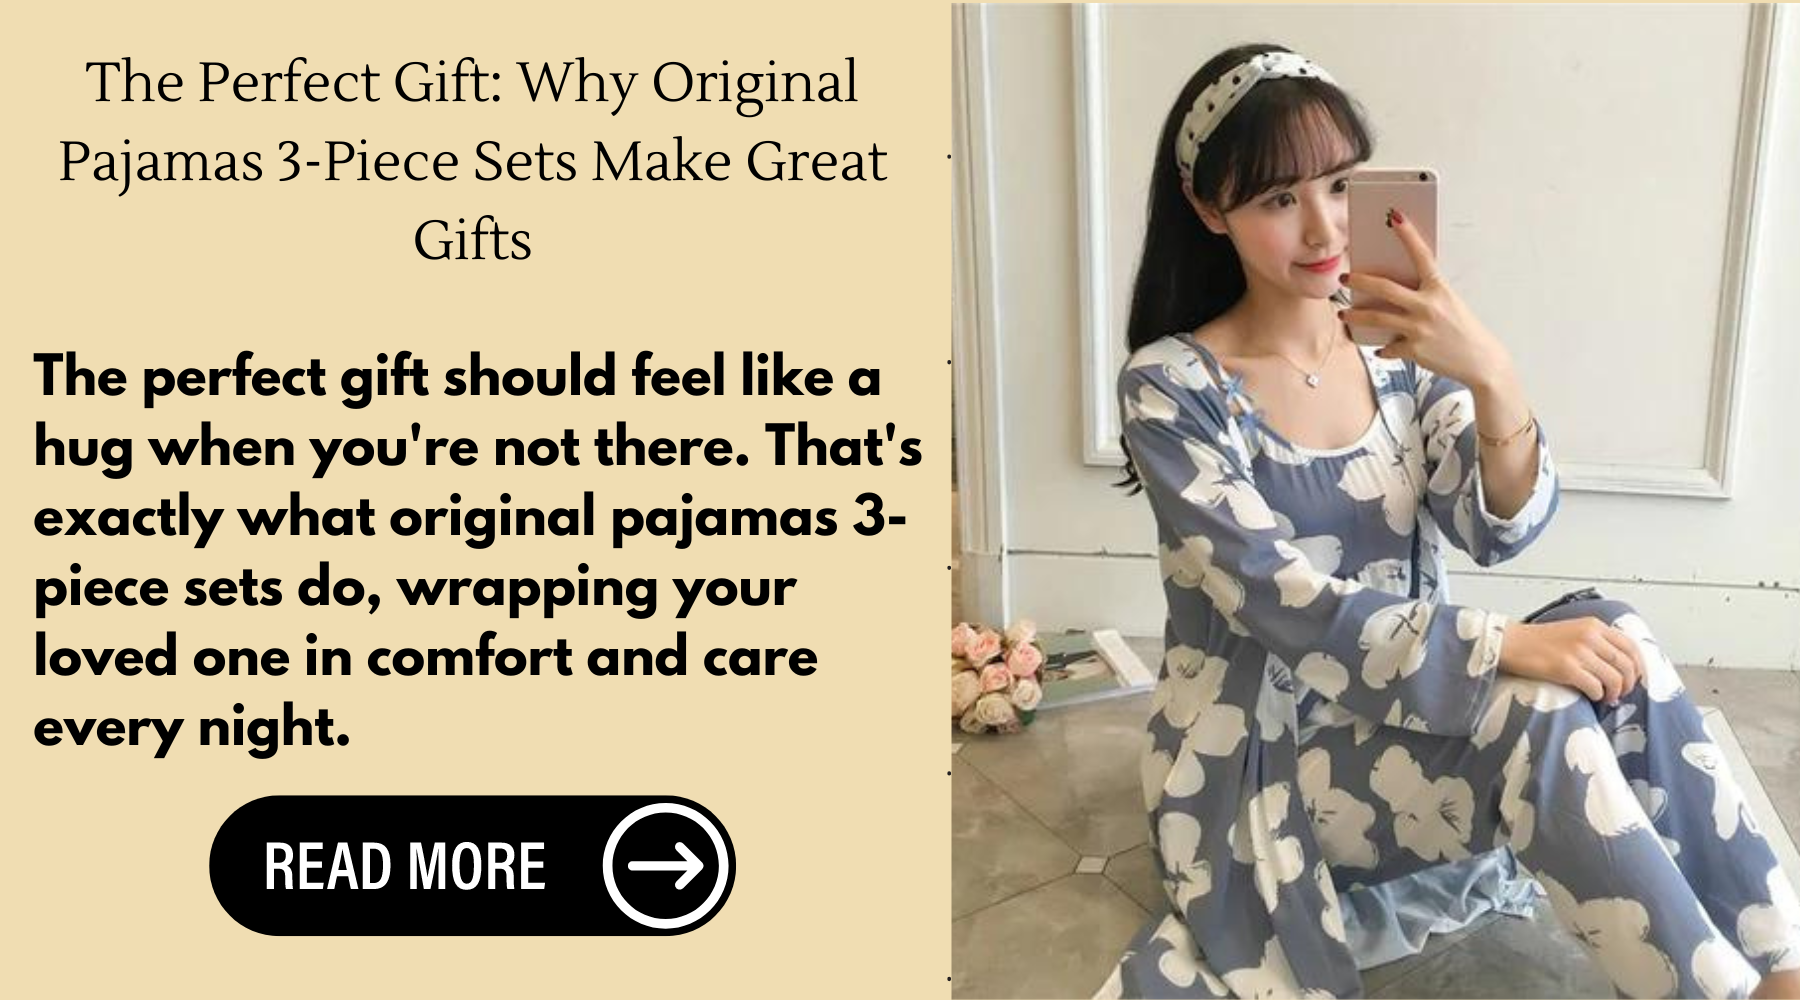 The Perfect Gift: Why Original Pajamas 3-Piece Sets Make Great Gifts